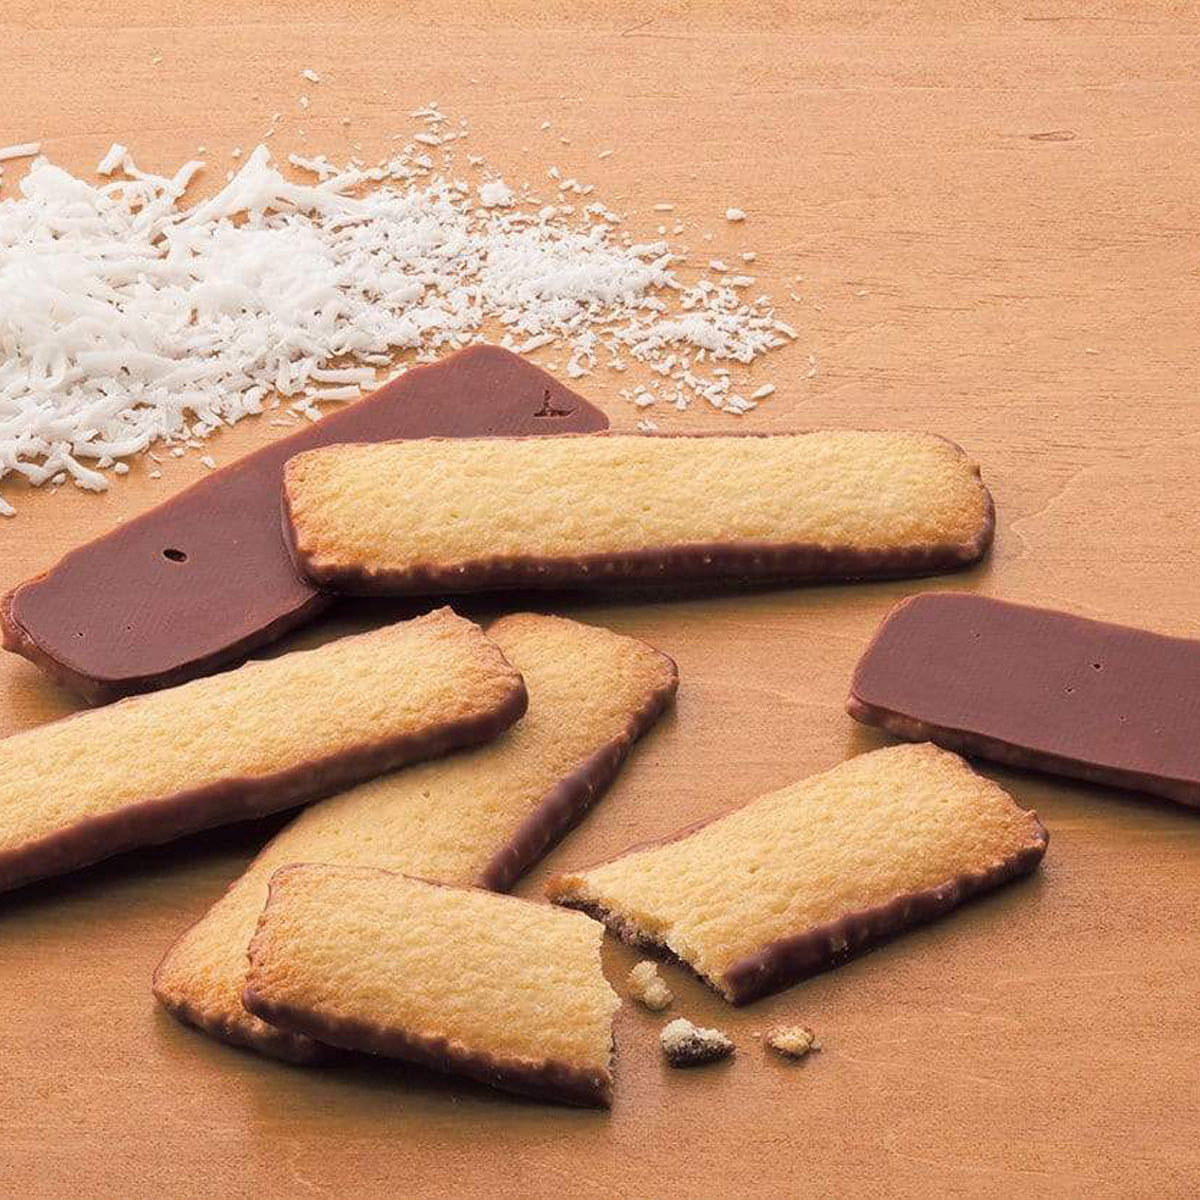 ROYCE' Chocolate - Baton Cookies "Coconut" - Image shows golden cookies with brown chocolate coating and white coconut shavings on a brown-colored surface.